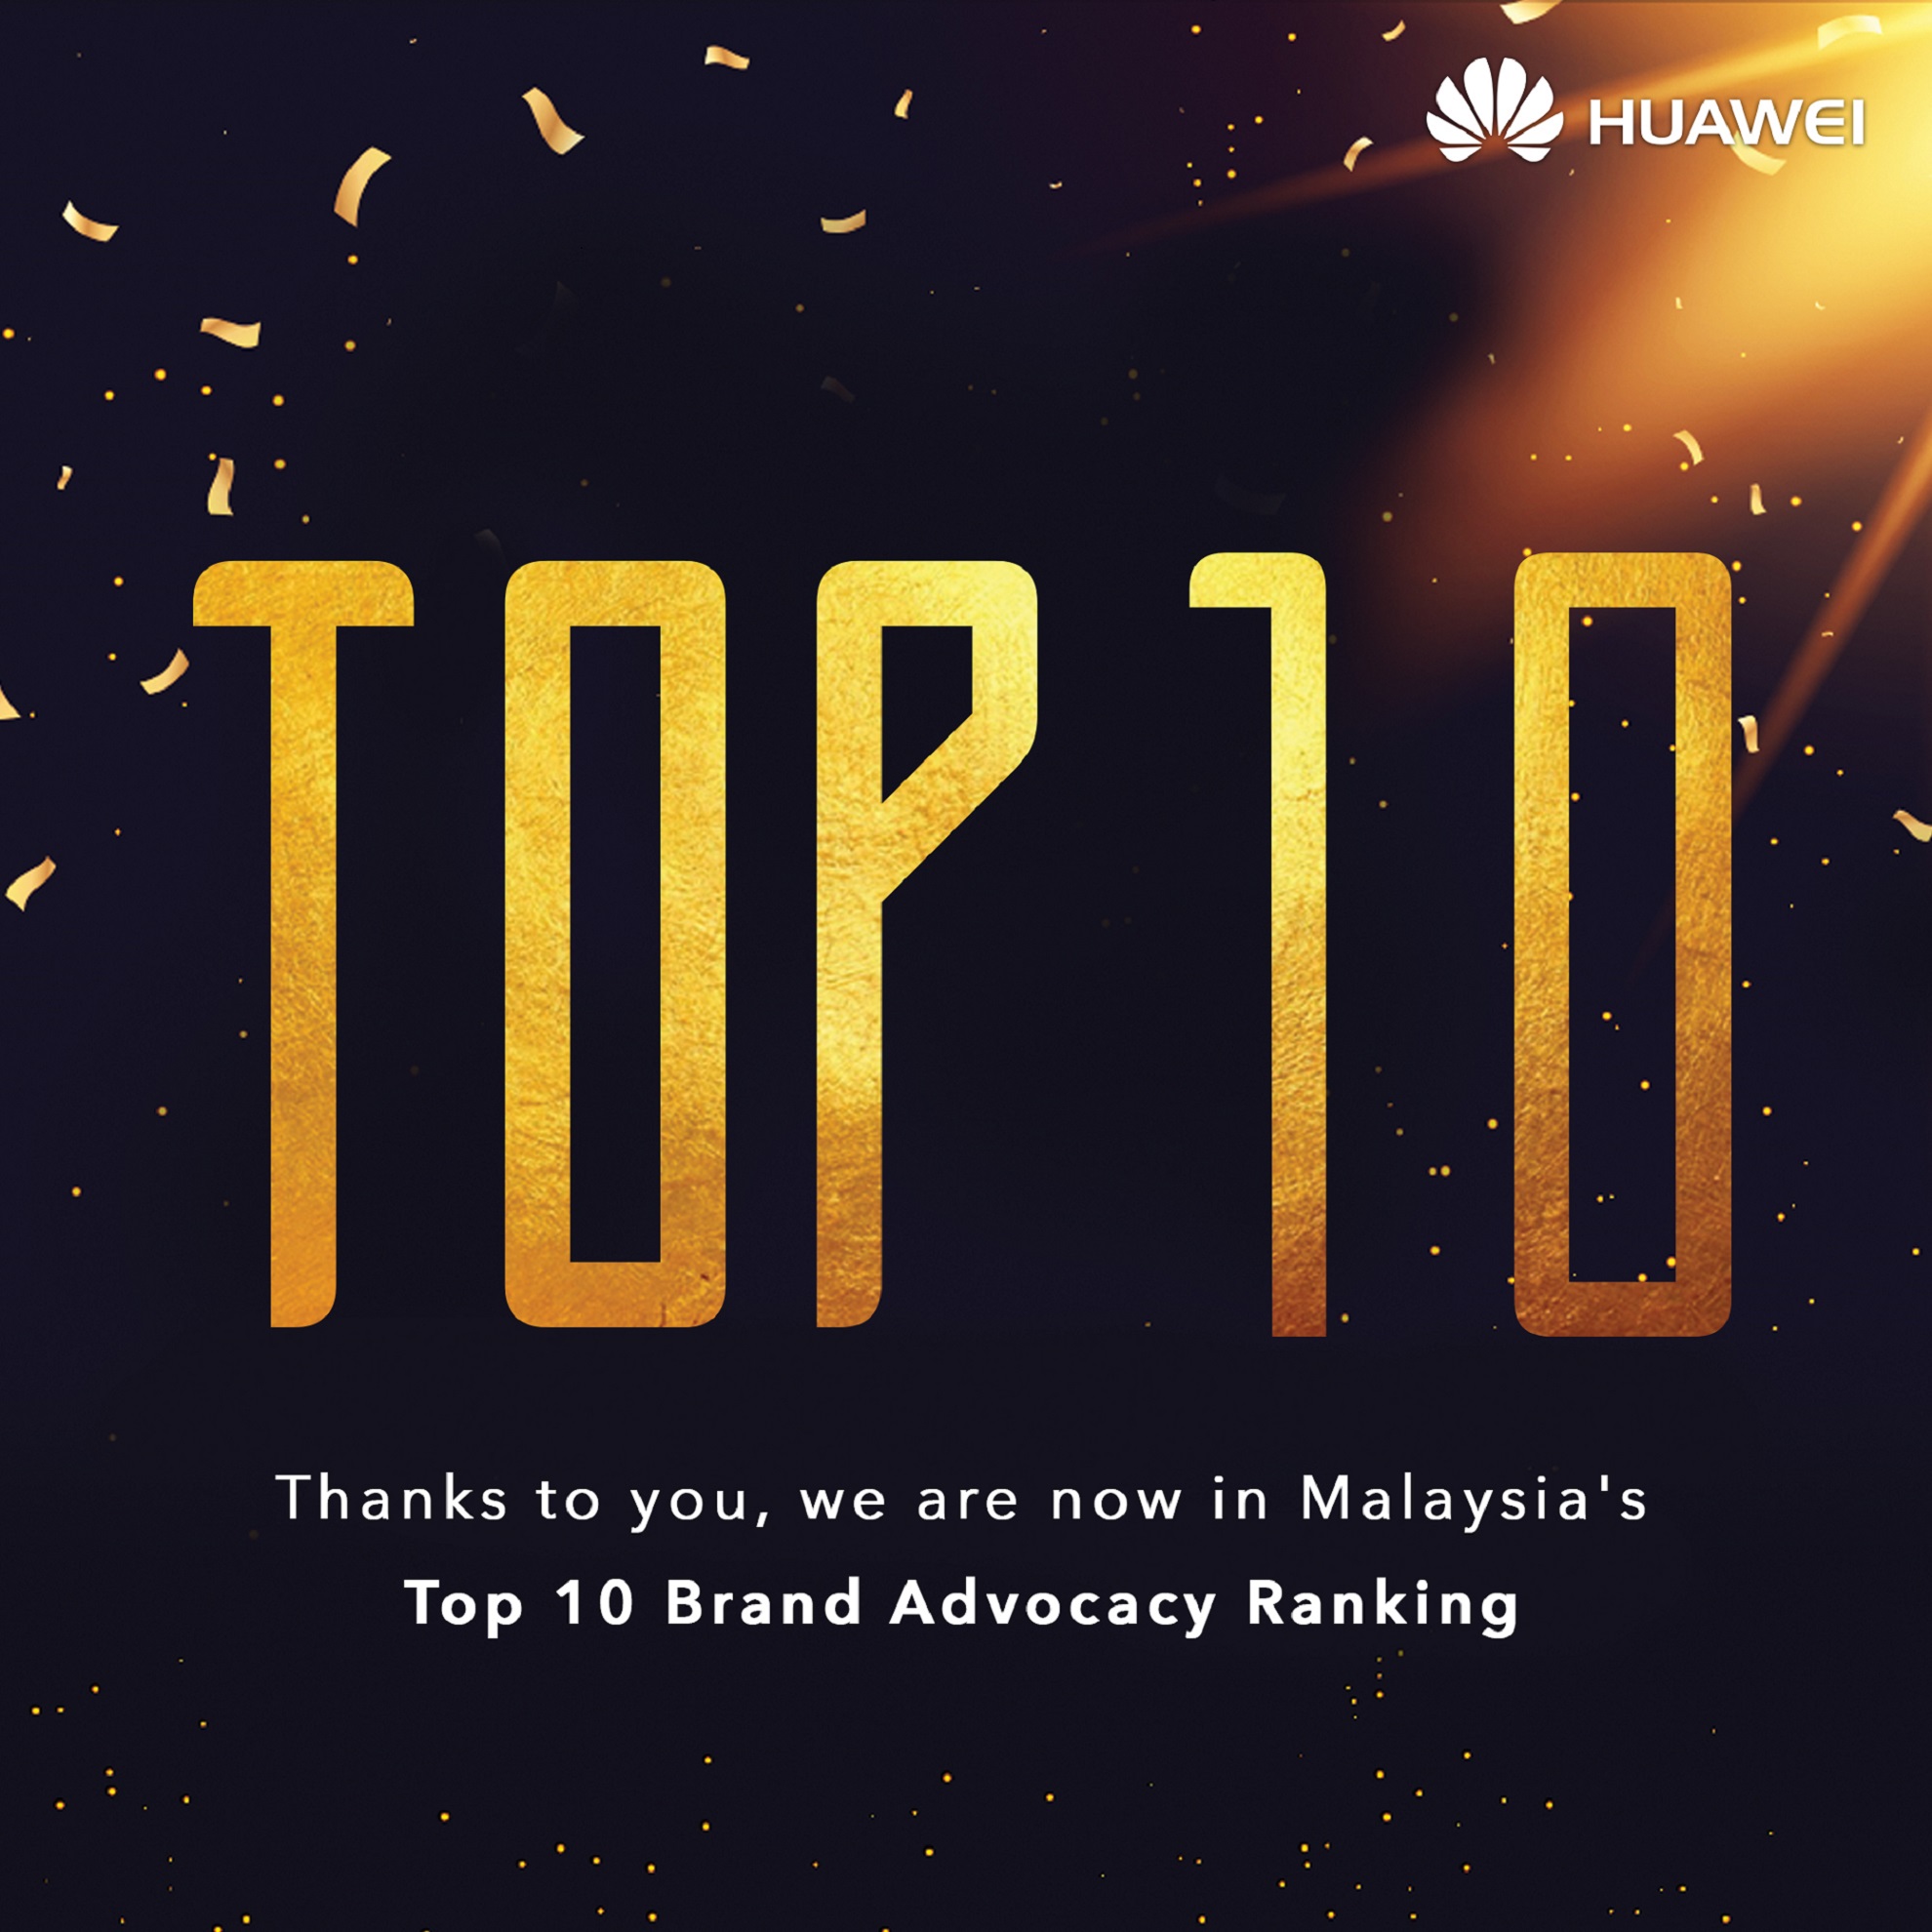 HUAWEI Made it to the Top 10 Brand of YouGov BrandIndex.jpg